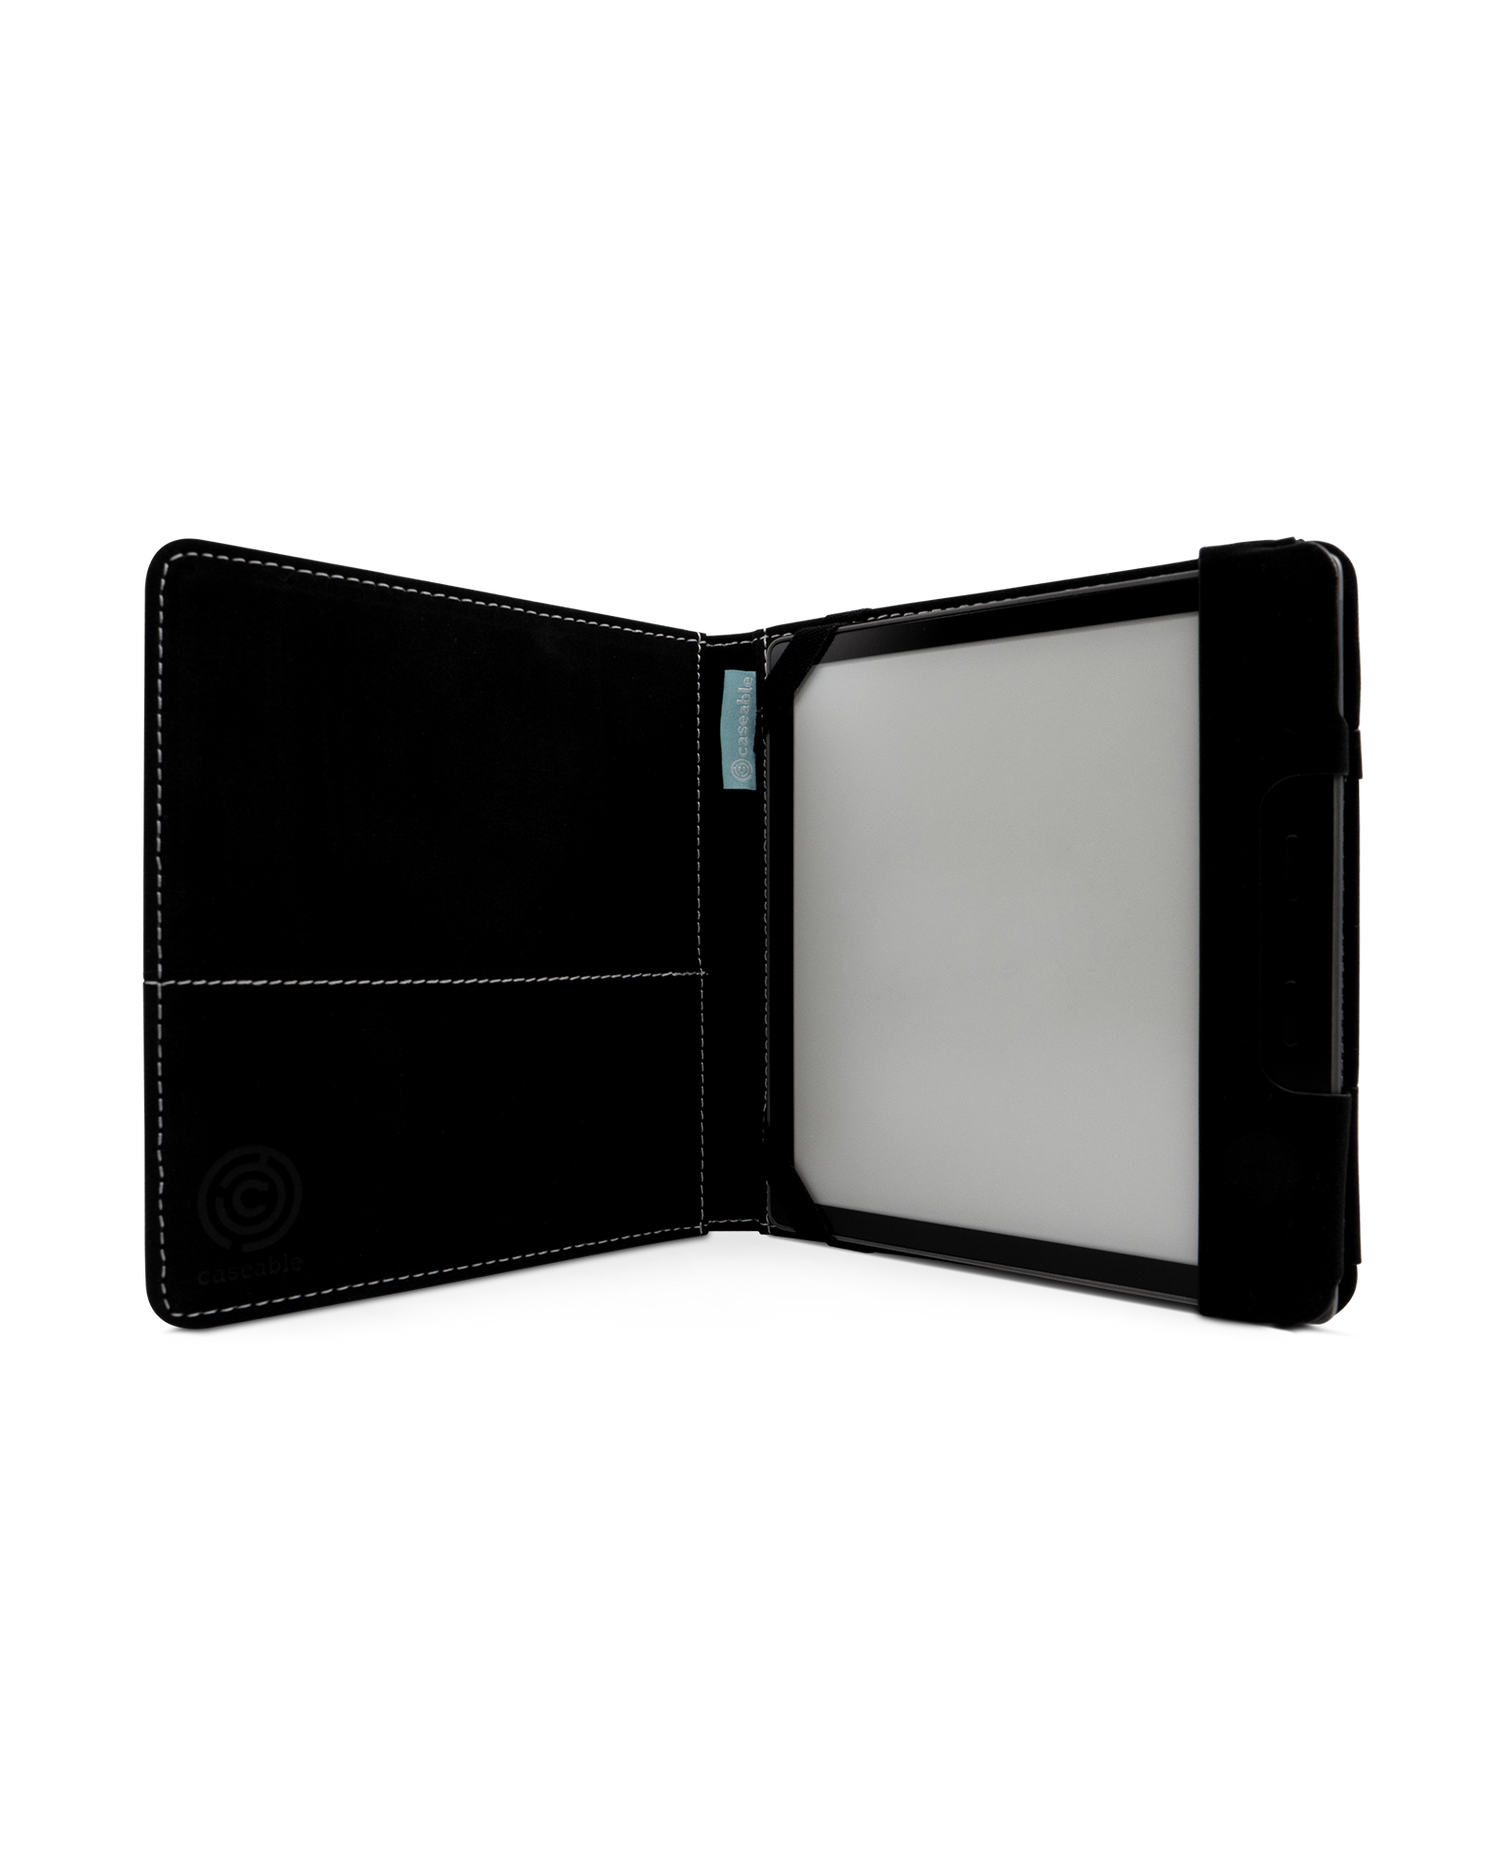 Mint Gold Marble Sparkle eReader Case for tolino vision 6: Opened interior view